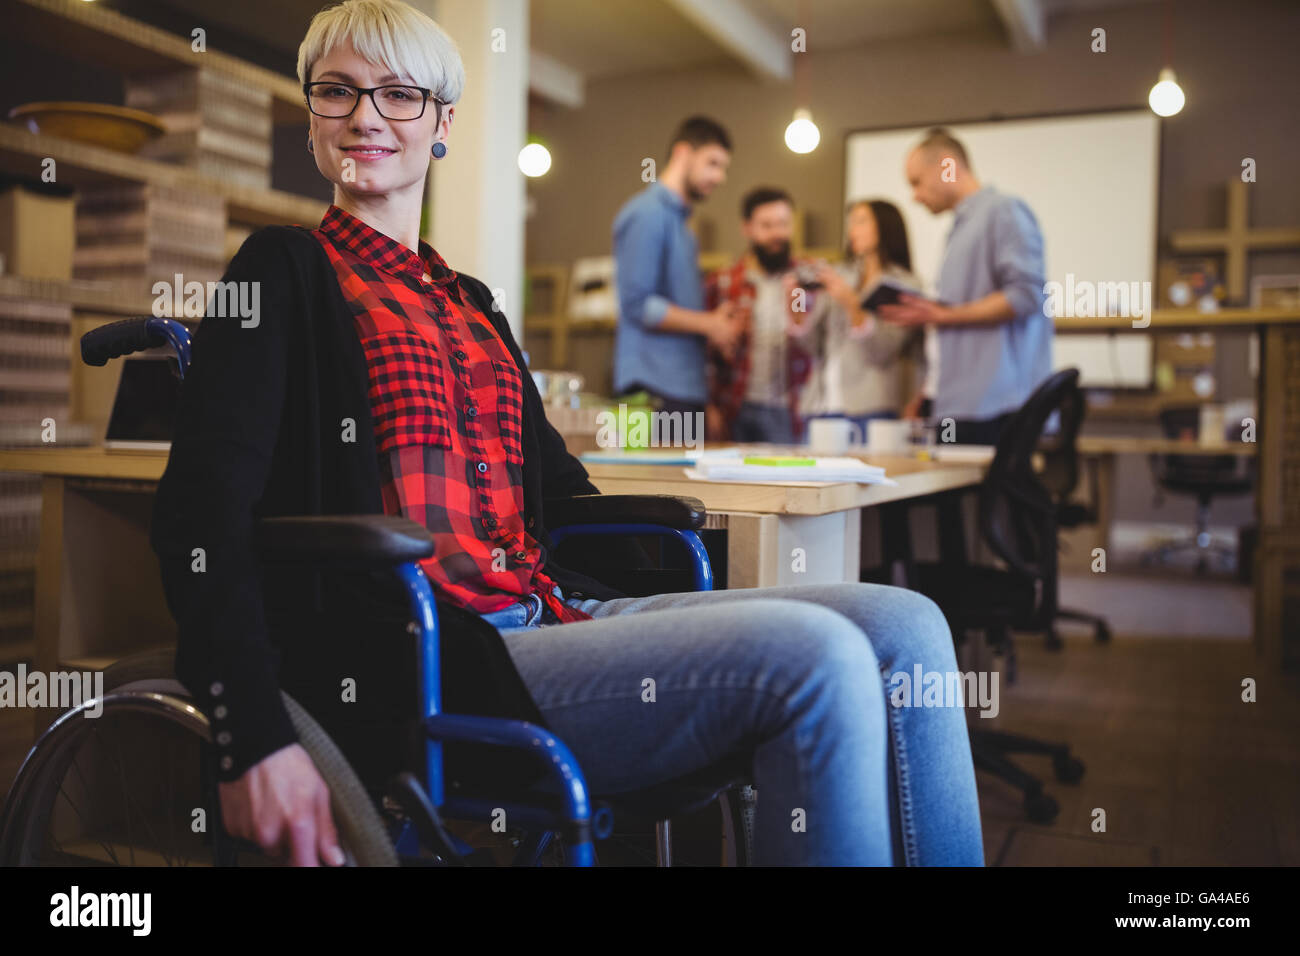 Confident woman on wheelchair while colleagues in background Stock Photo